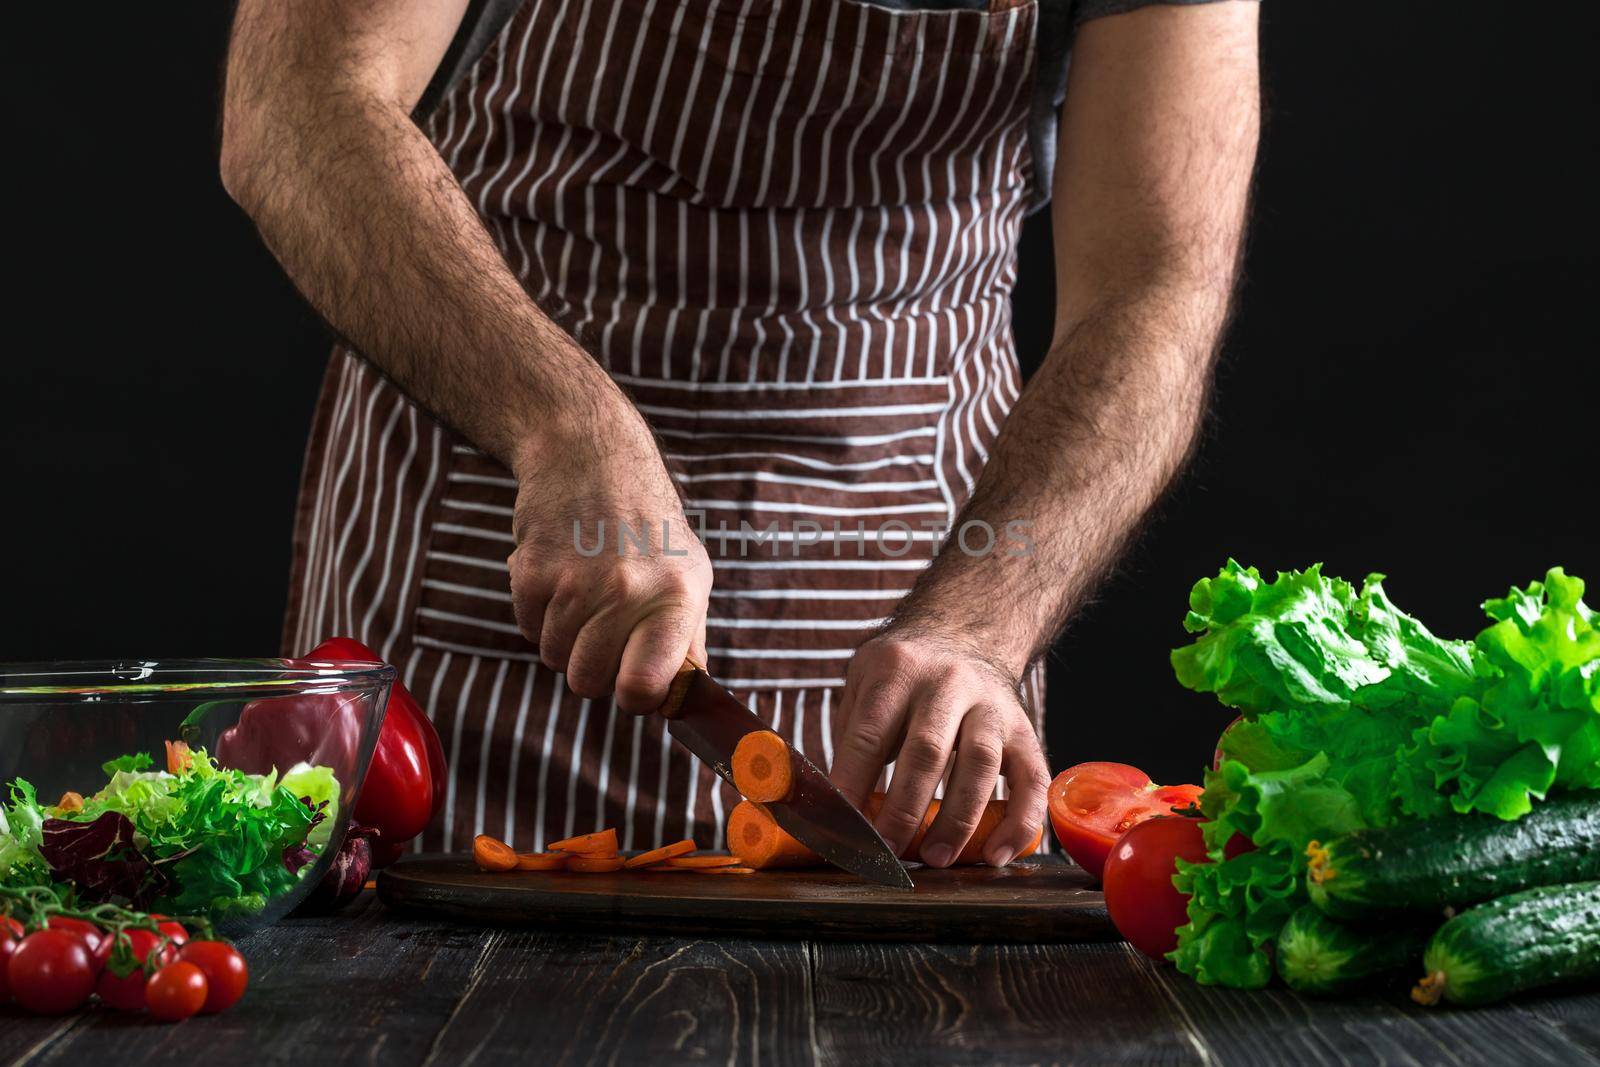 Young home cook man in apron slicing carrot with kitchen knife. Men's hands cut the carrot to make a salad on black background. Healthy food concept